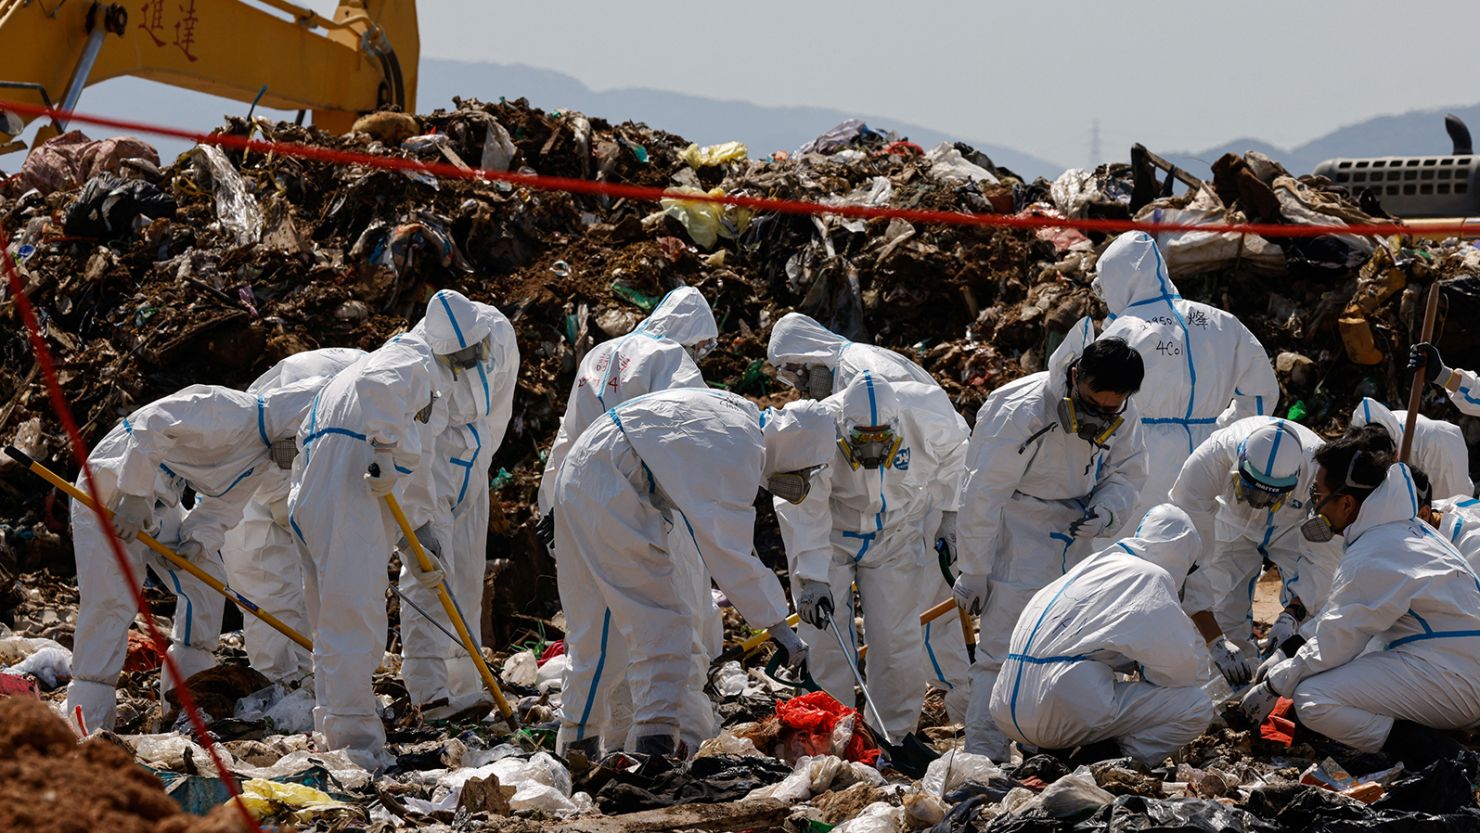 Police excavate a landfill during a search for the body parts of 28-year-old Abby Choi in Hong Kong on February 28.